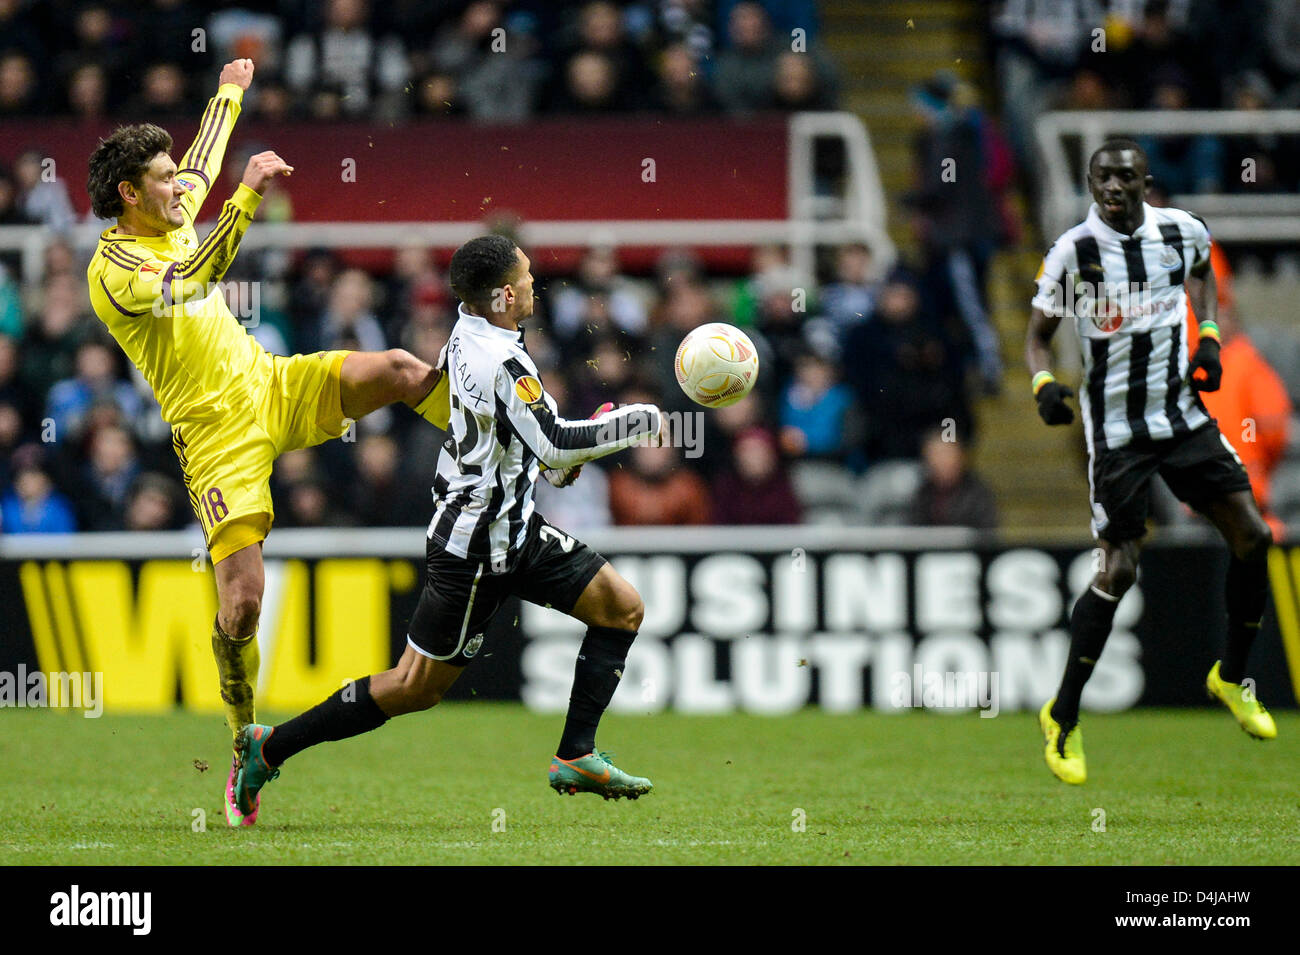 14.03.2013 Newcastle, England. Anzhi Makhachkala's Yuri Zhirkov makes a high tackle on Newcastle's Sylvain Marveaux and get's booked in action during the Europa League game between Newcastle and Anzhi Makhachkala from St James Park. Stock Photo